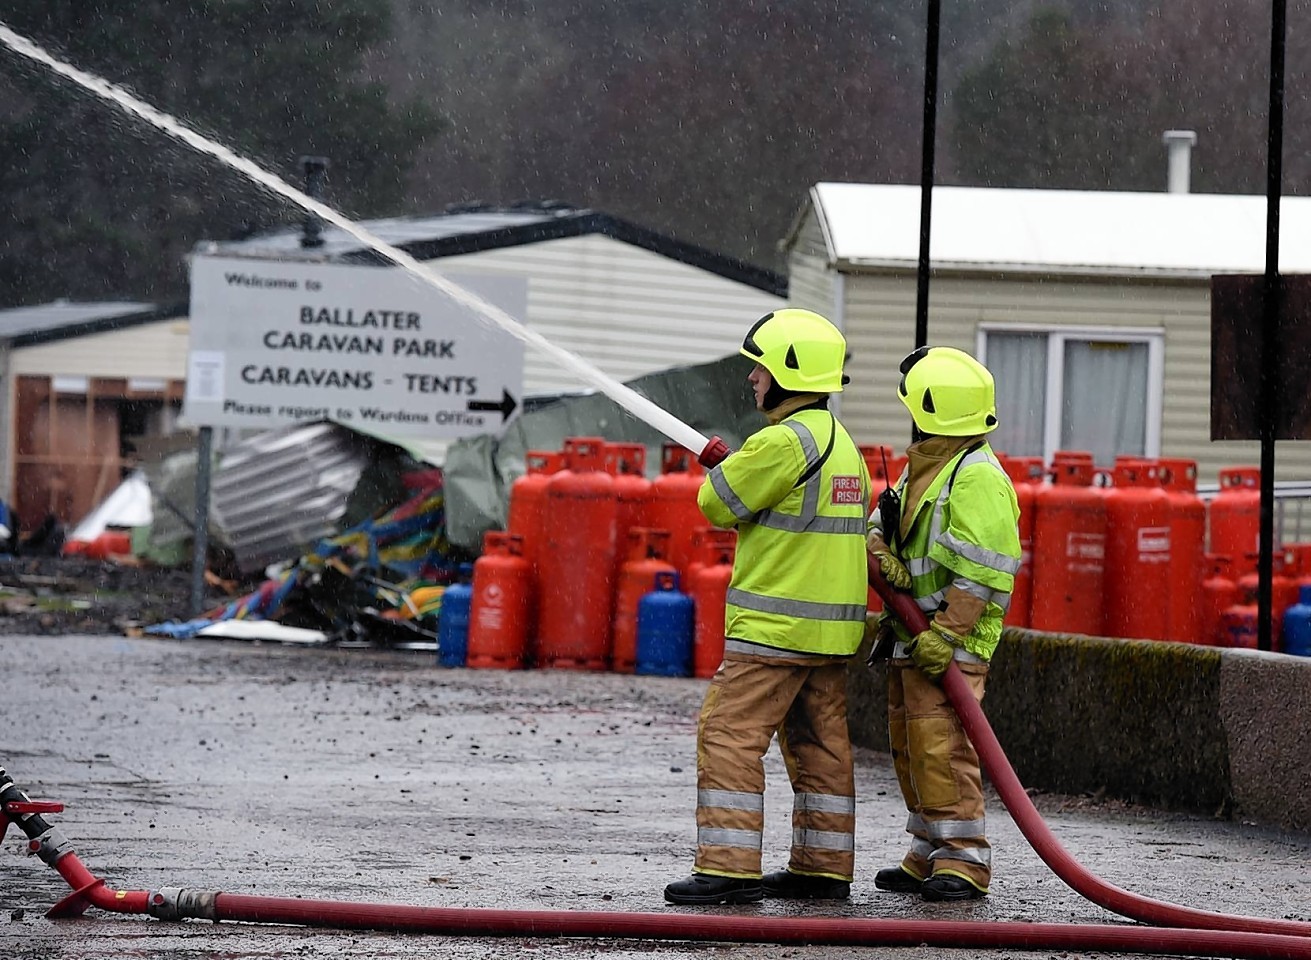 Firefighters working to clear up in Ballater